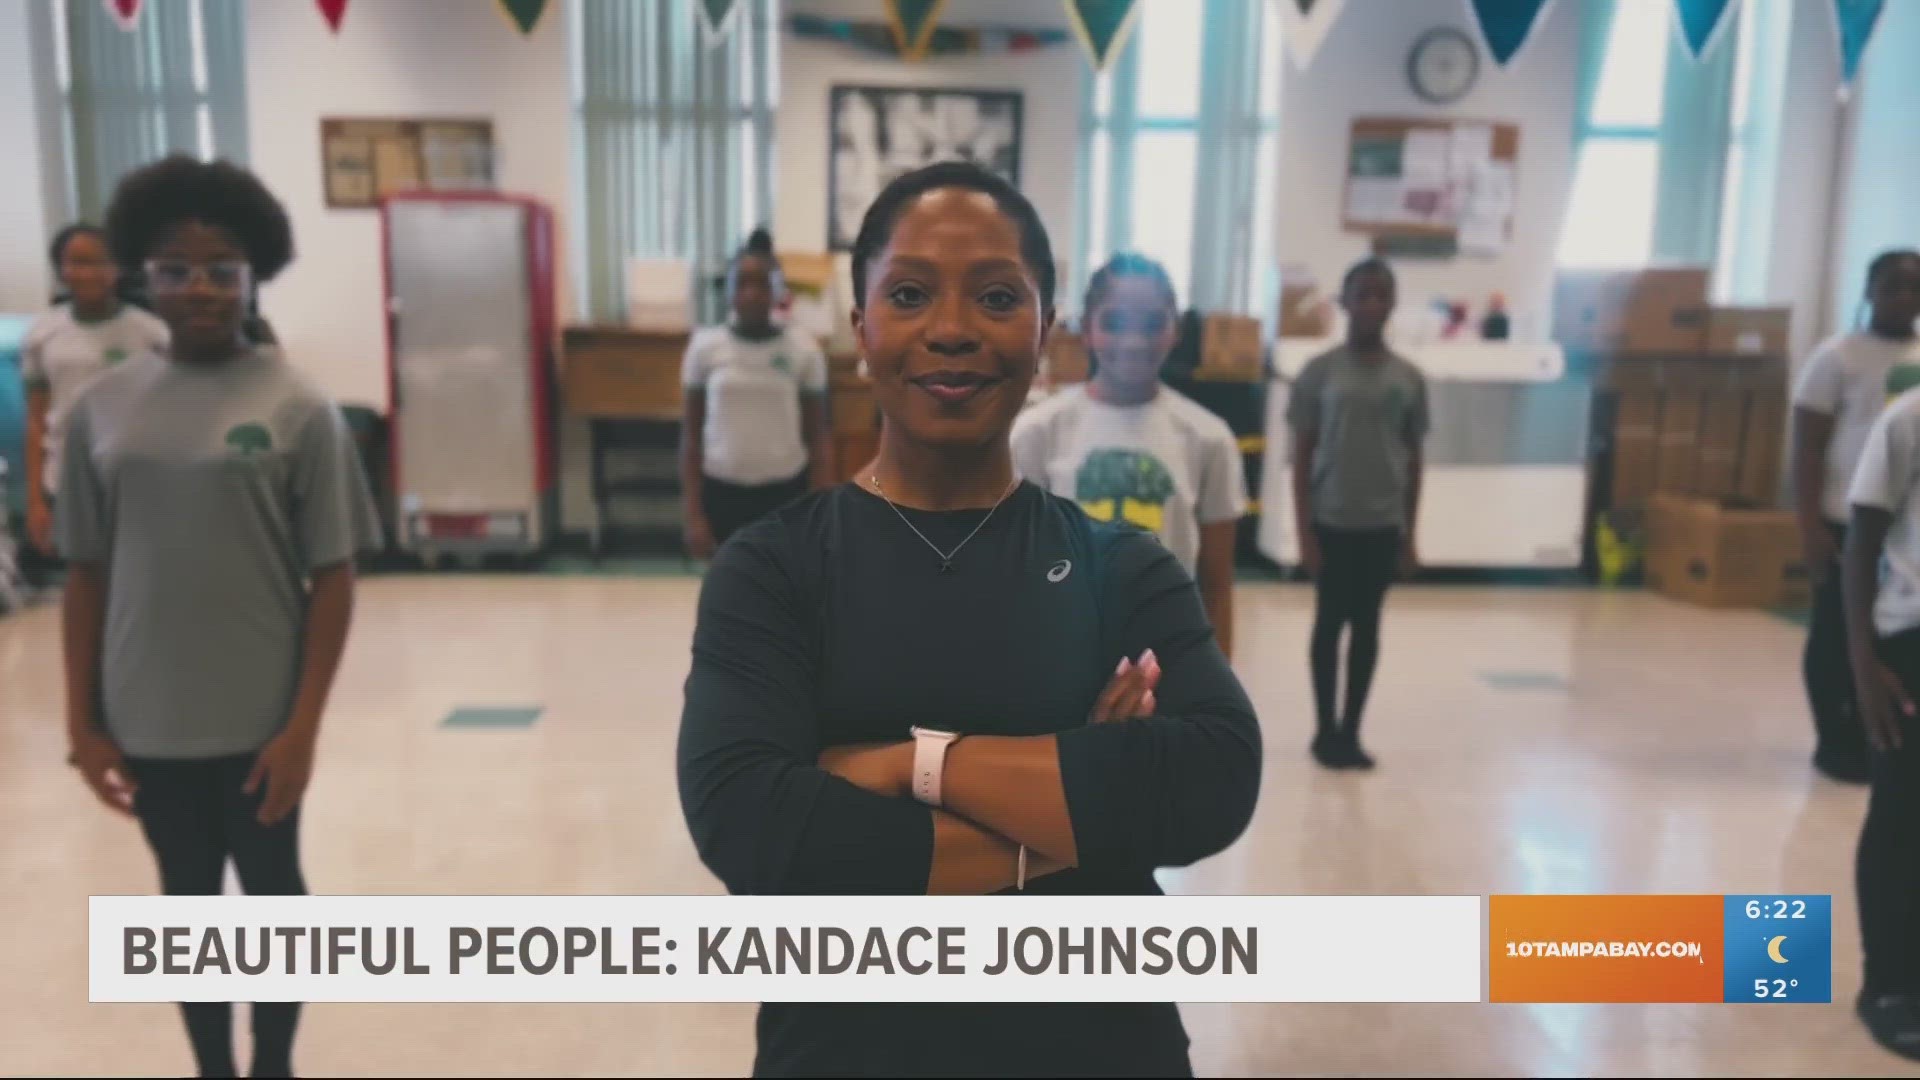 Kandance has seen first-hand how integrating arts into the classroom enhances a child's learning ability.